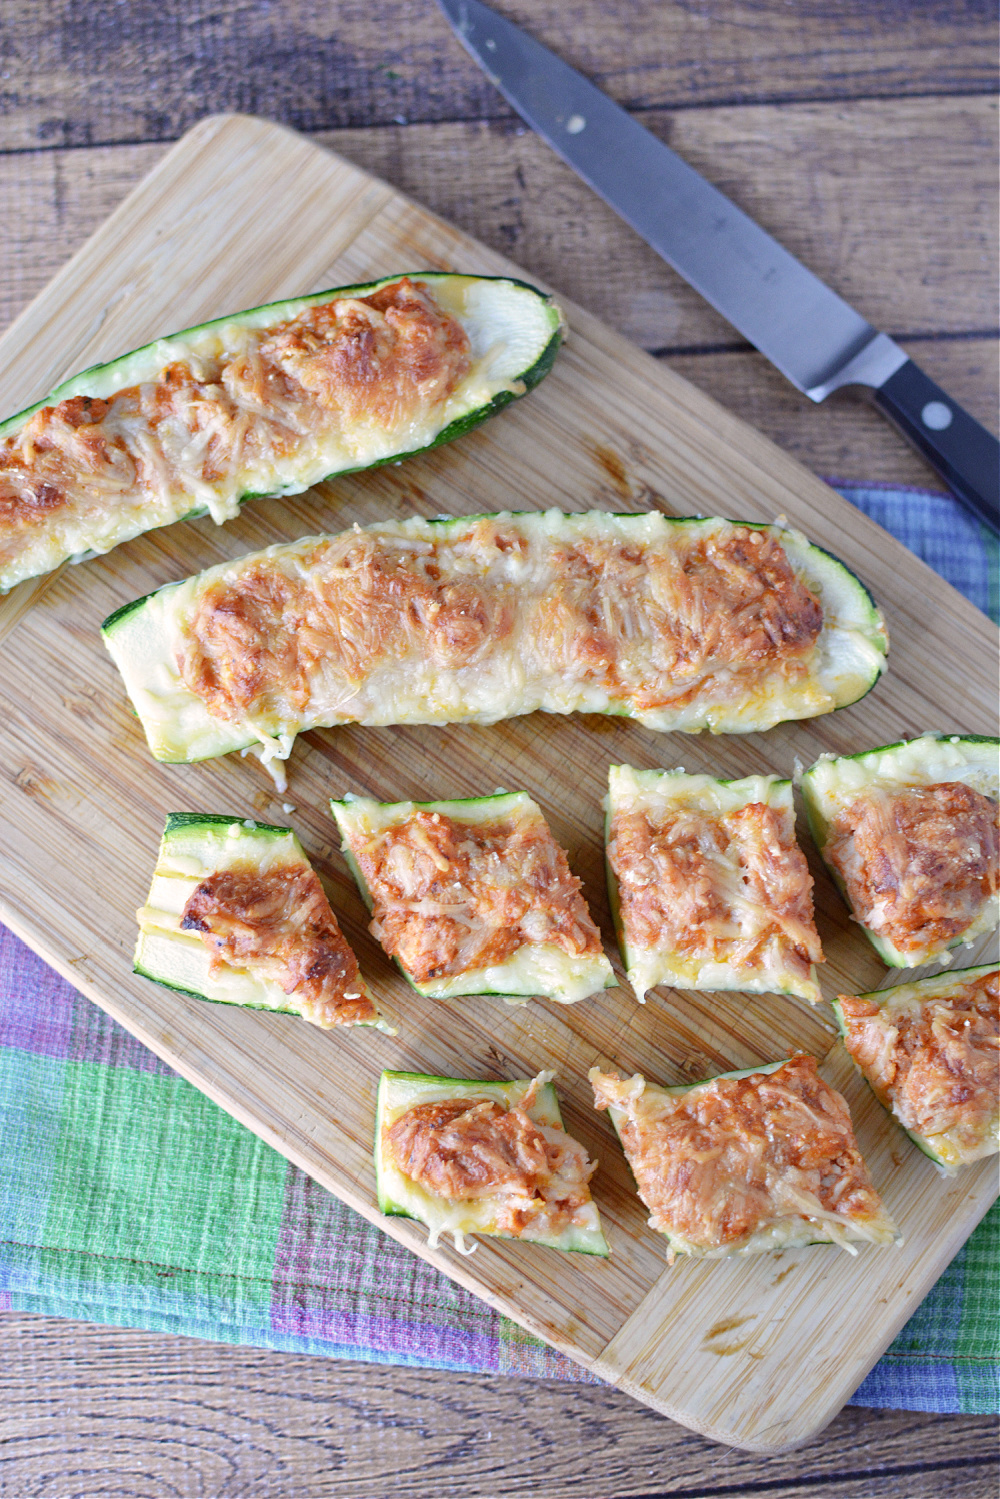 halved zucchini topped with melted cheese on a wooden cutting board